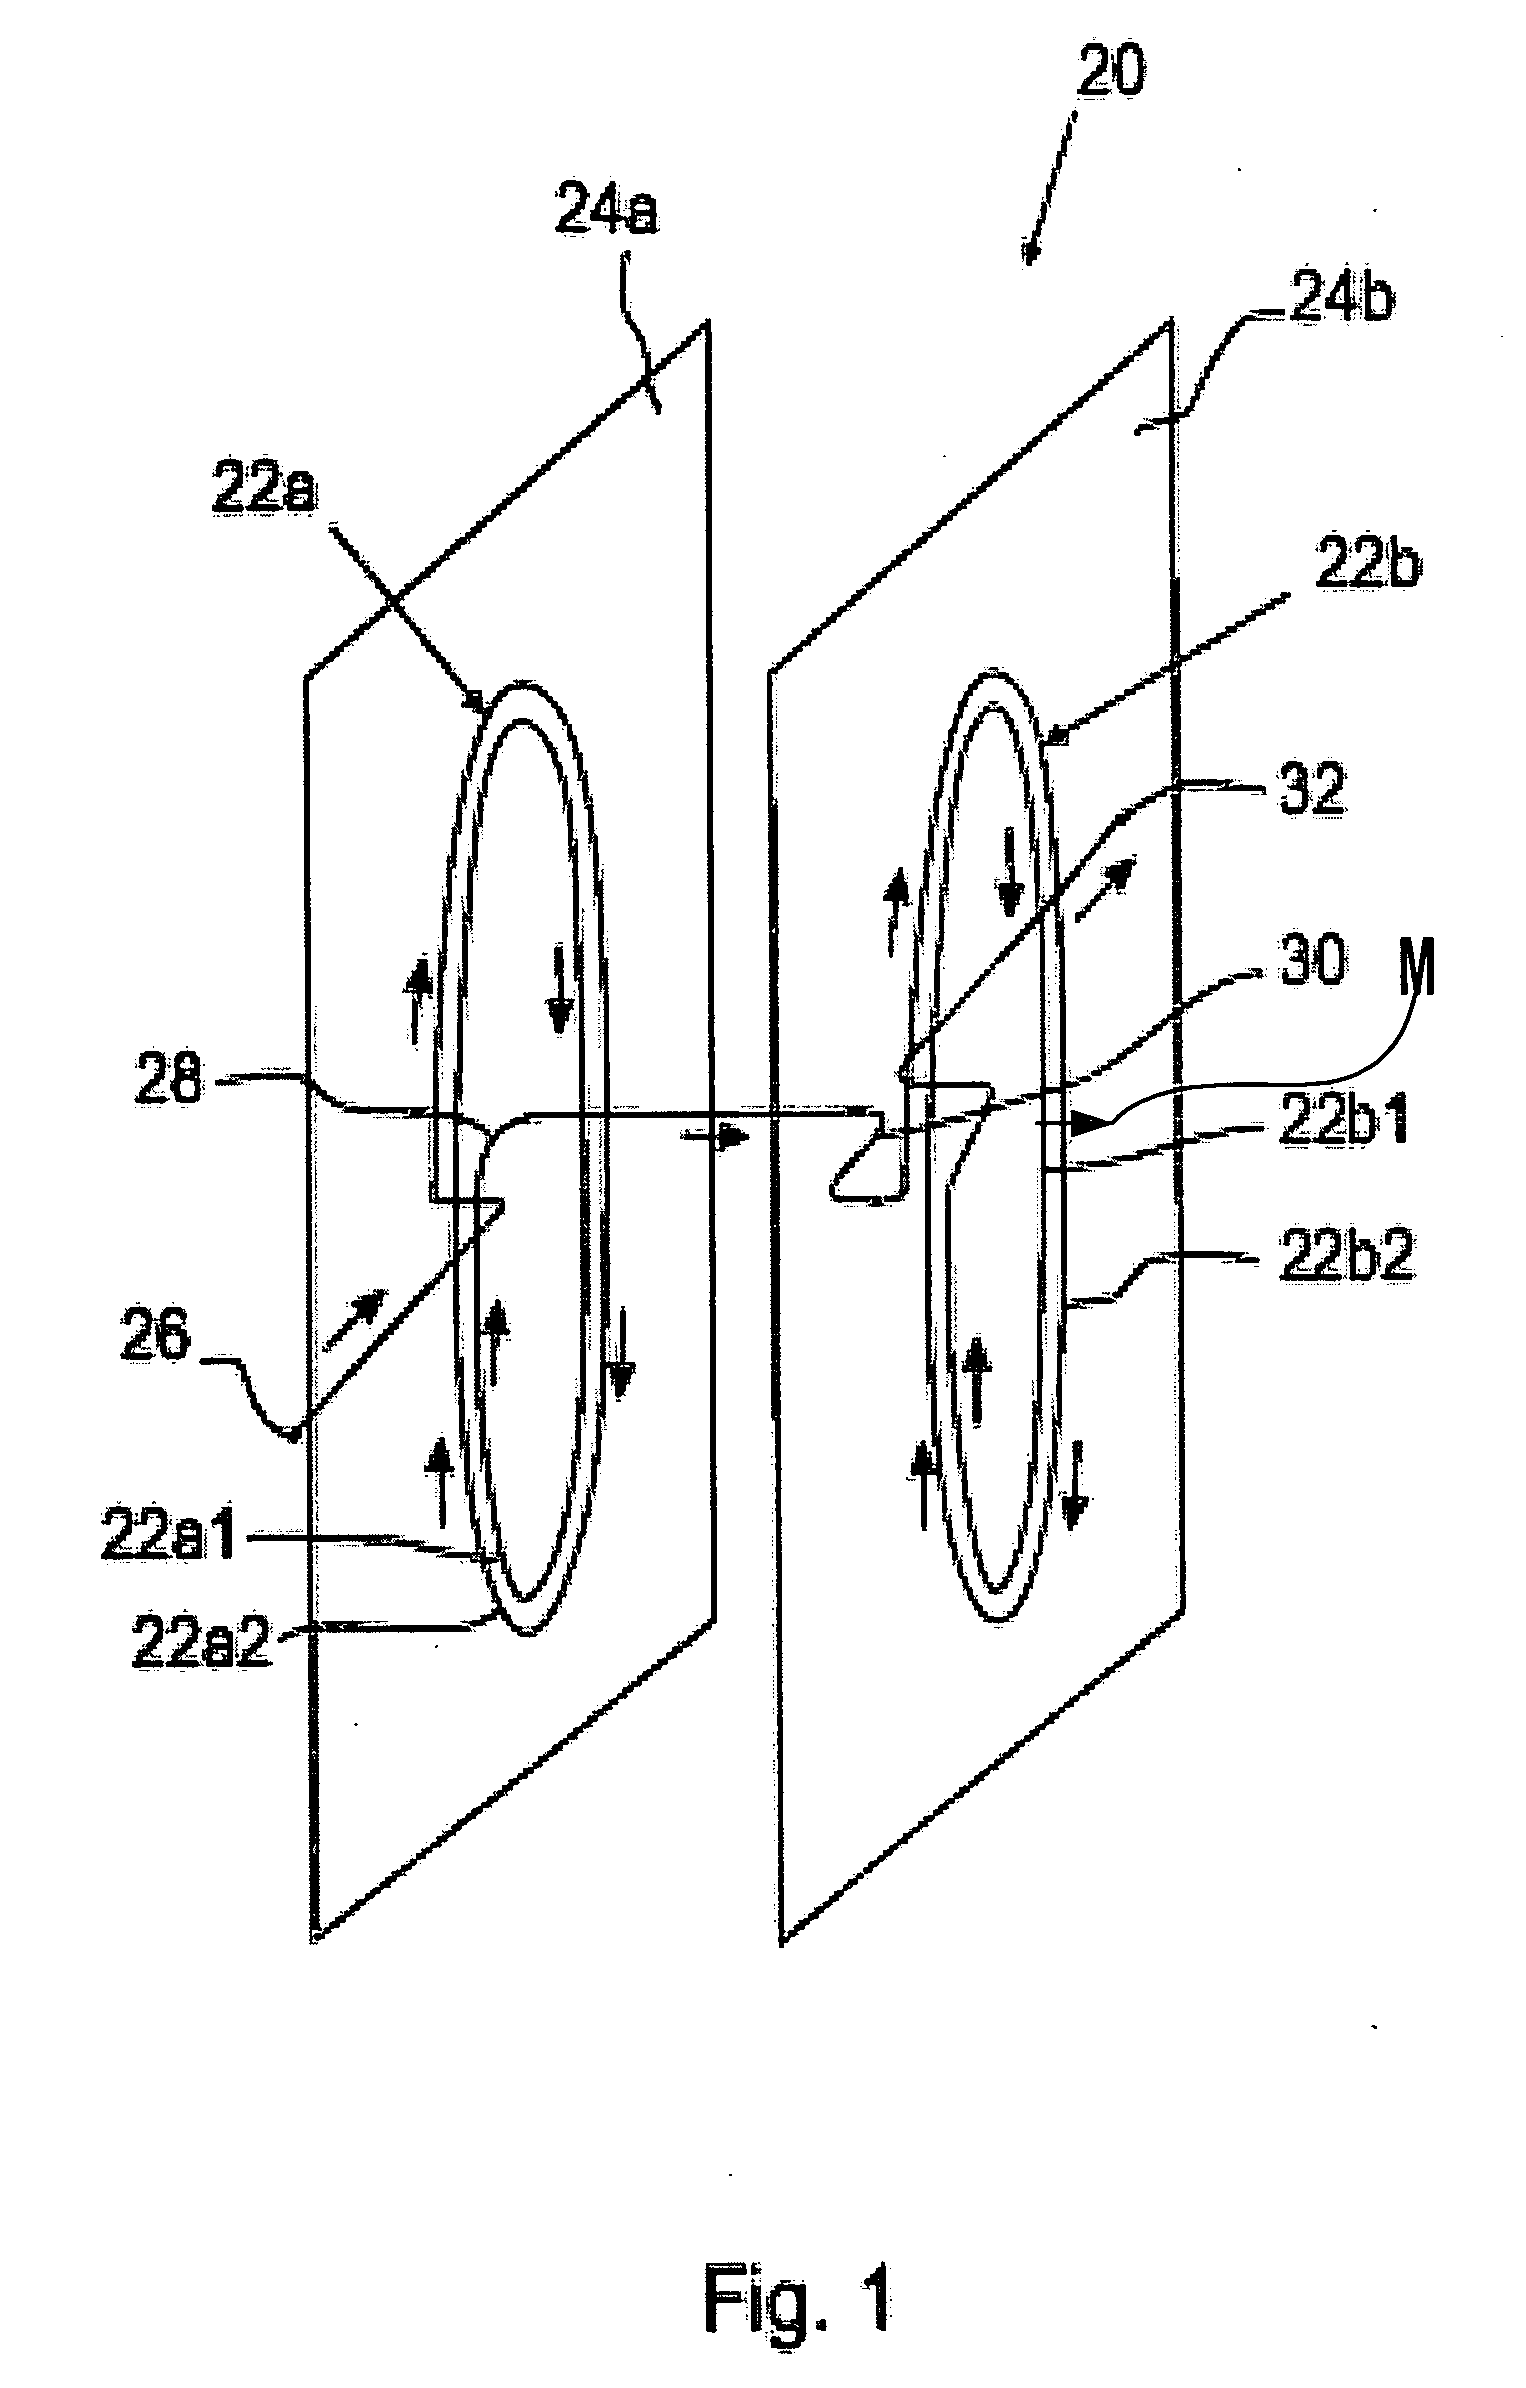 Method and apparatus for application of thin coatings from plasma onto inner surfaces of hollow containers